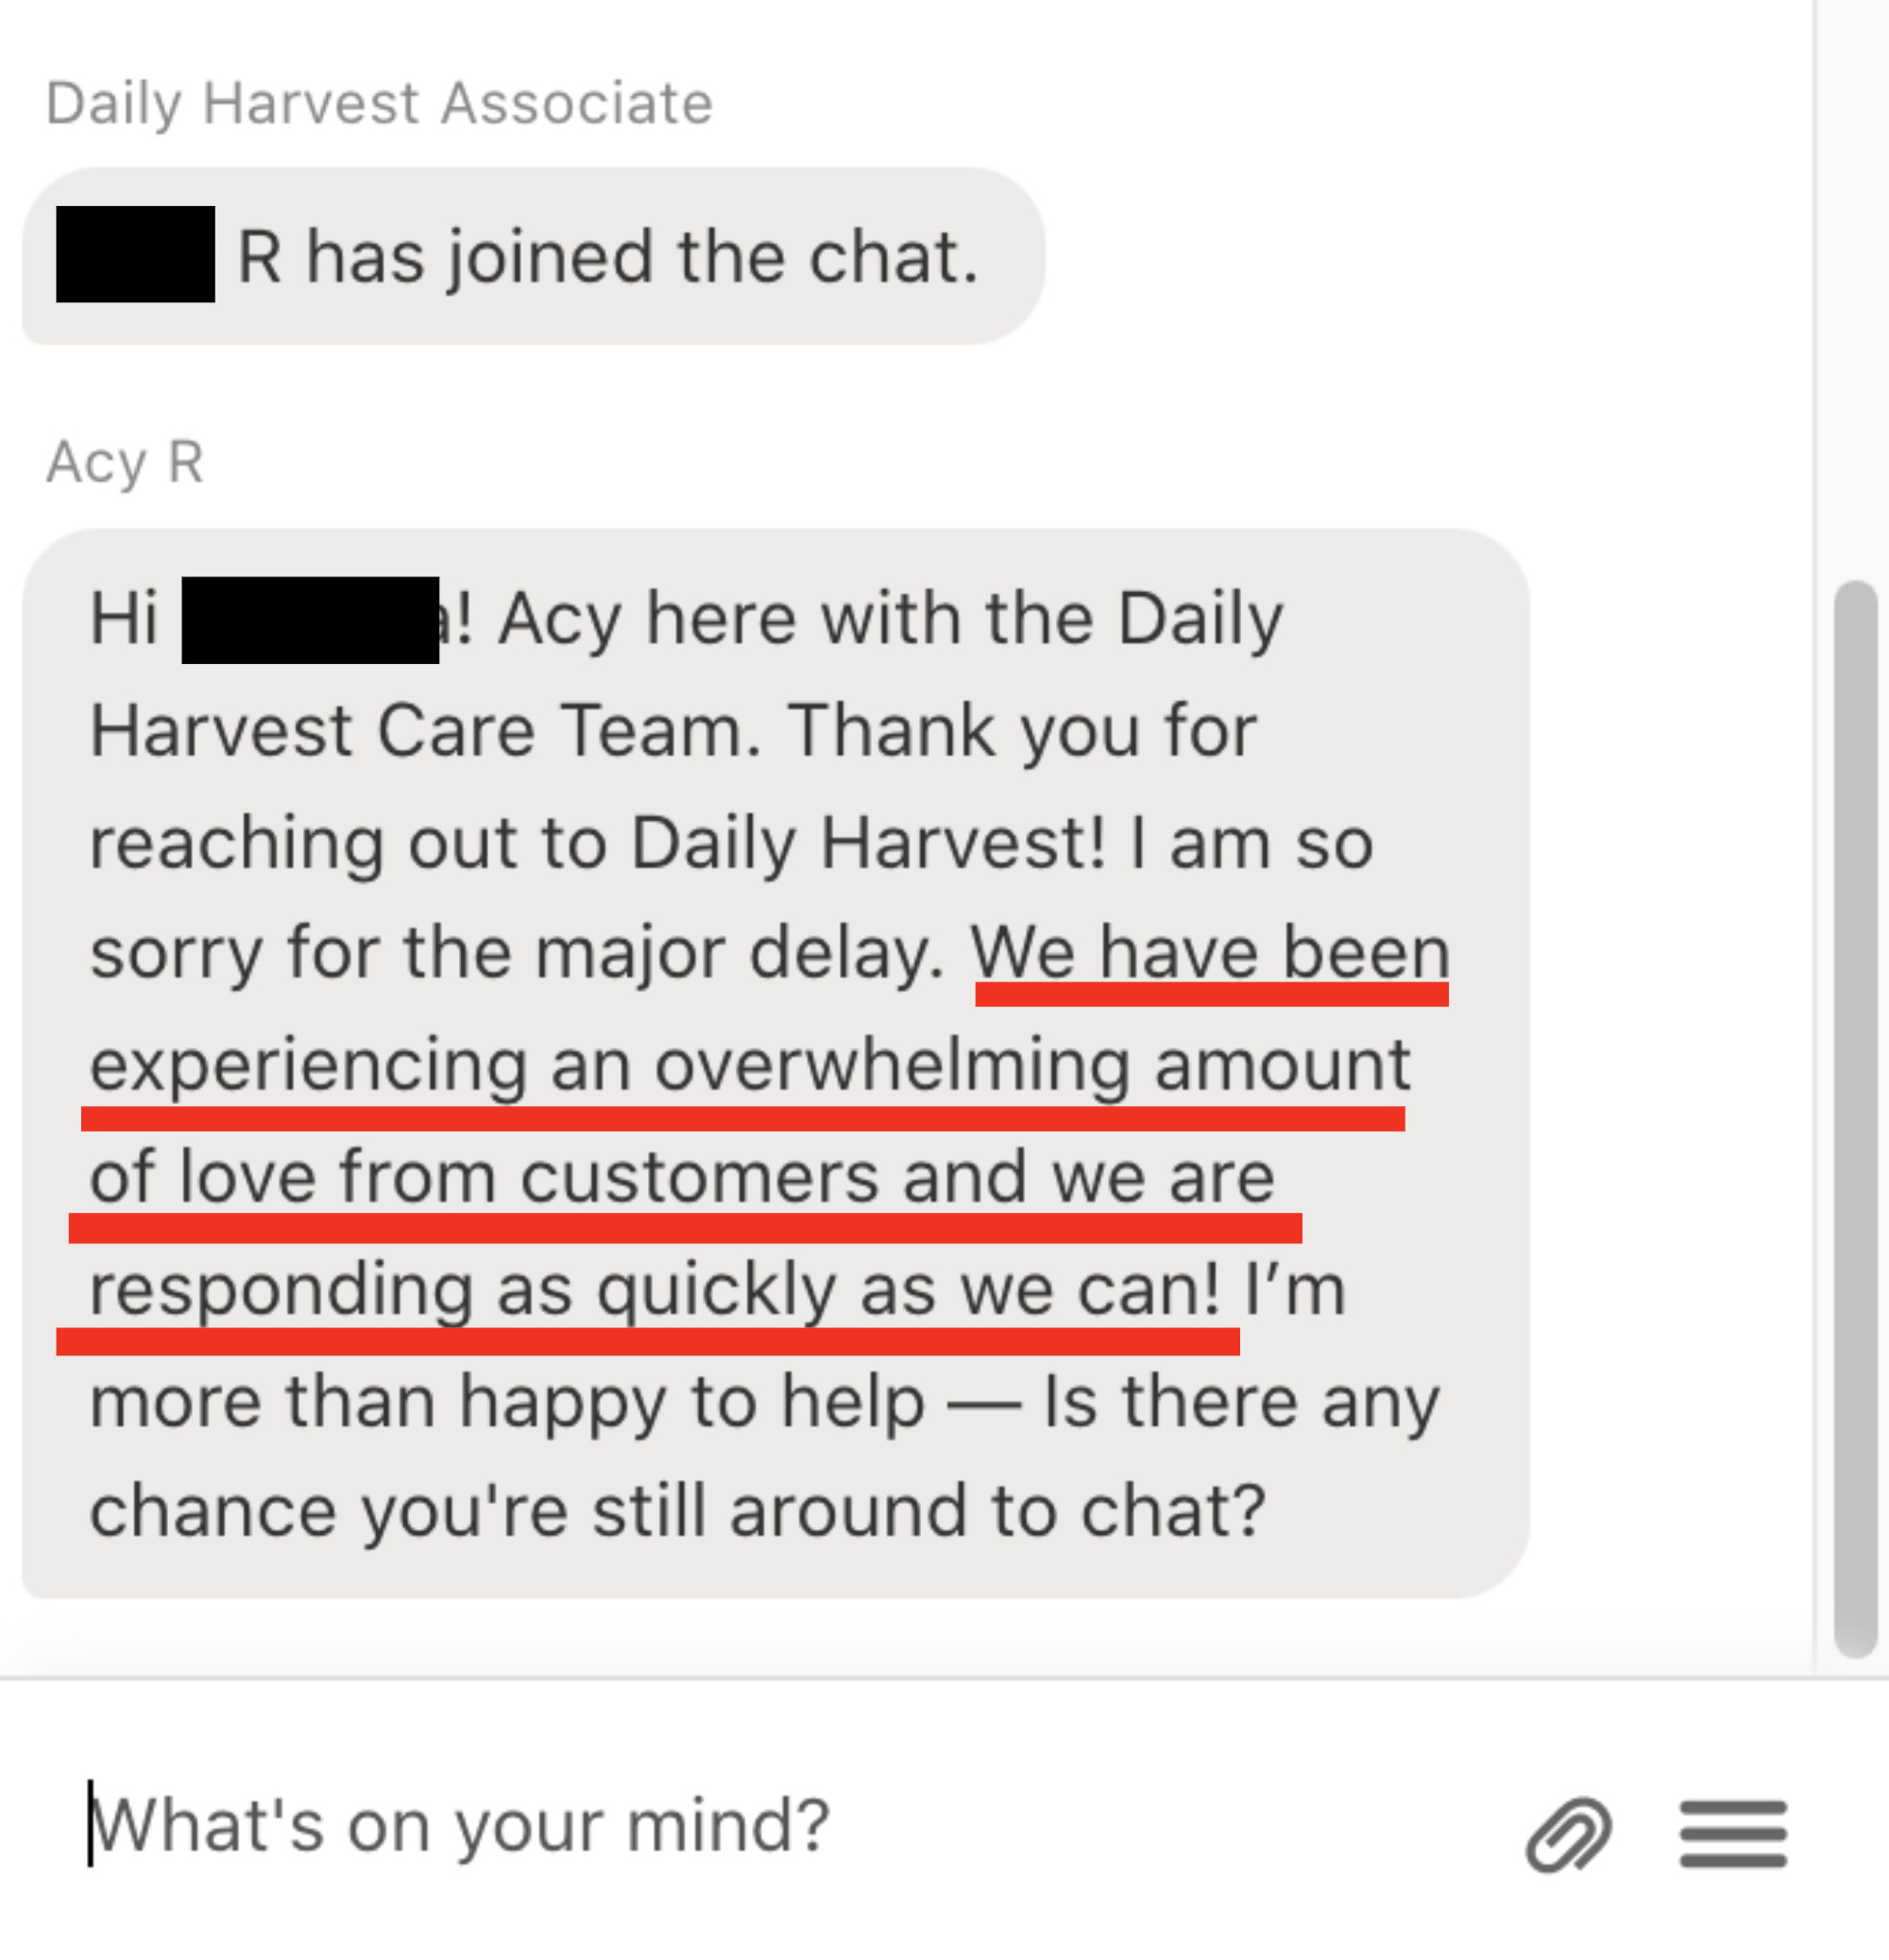 Text from daily harvest that reads &quot;we have been experiencing an overwhelming amount of love from customers and we are responding as quickly as we can&quot;